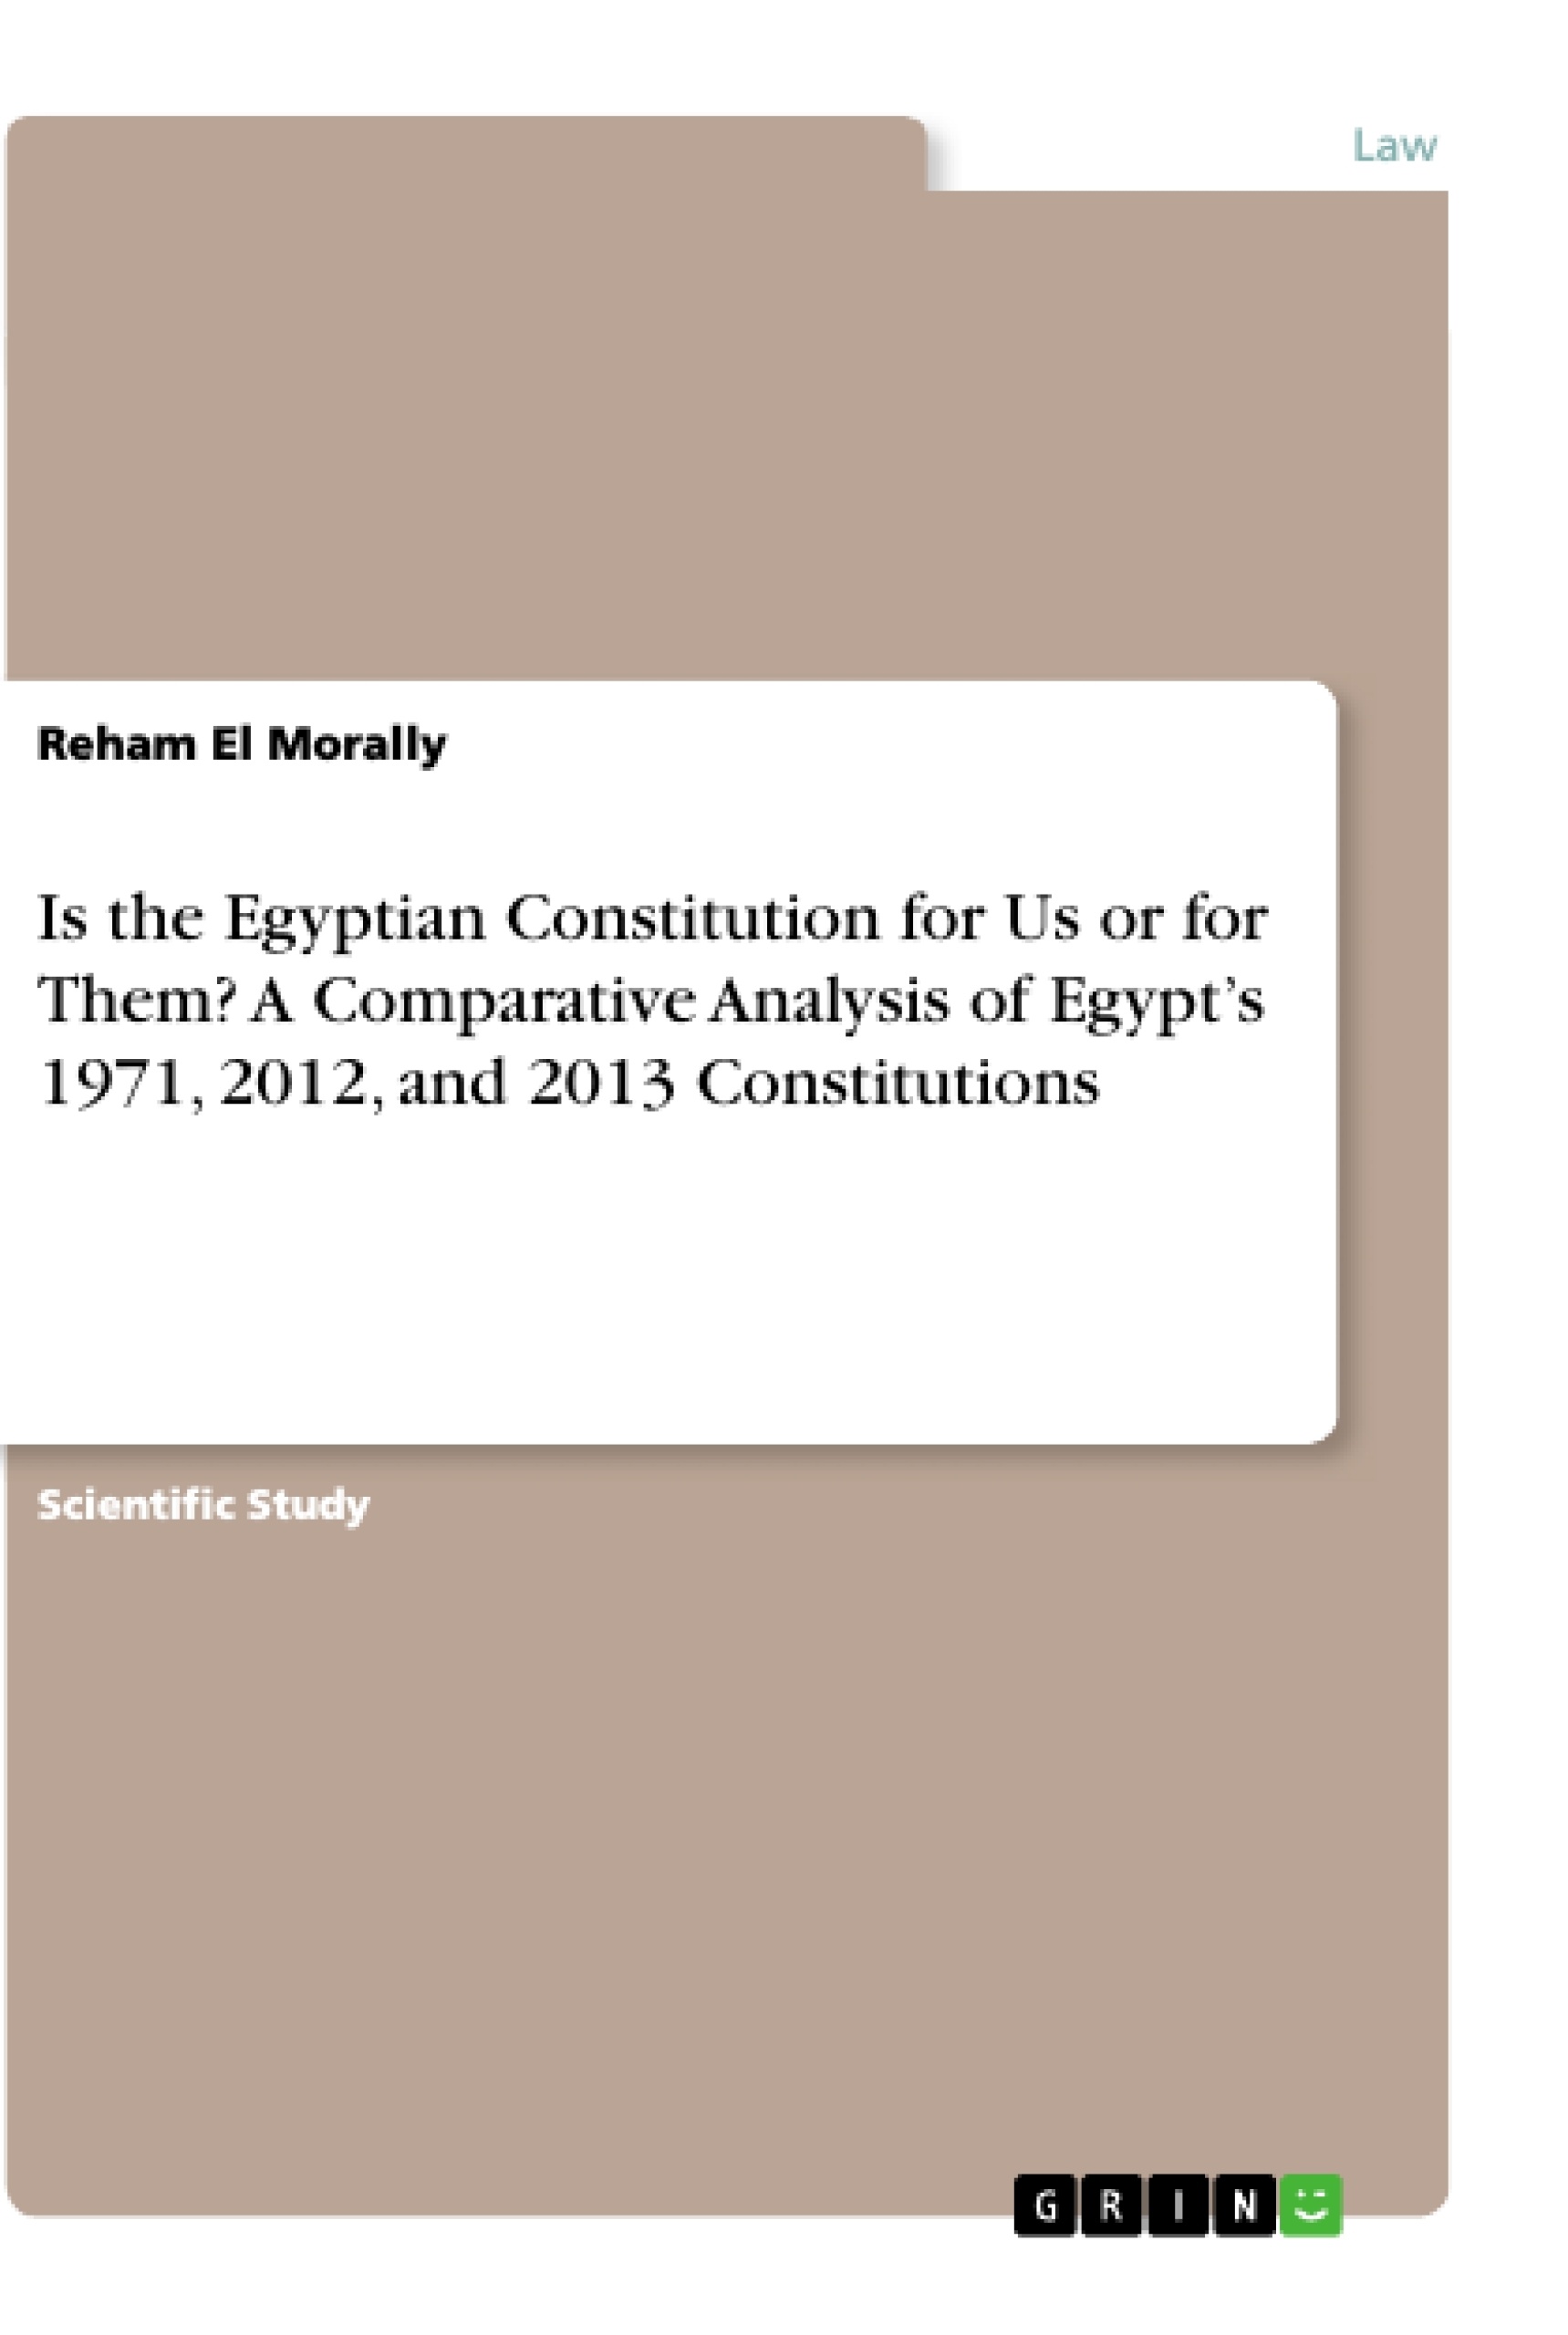 Título: Is the Egyptian Constitution for Us or for Them? A Comparative Analysis of Egypt’s 1971, 2012, and 2013 Constitutions